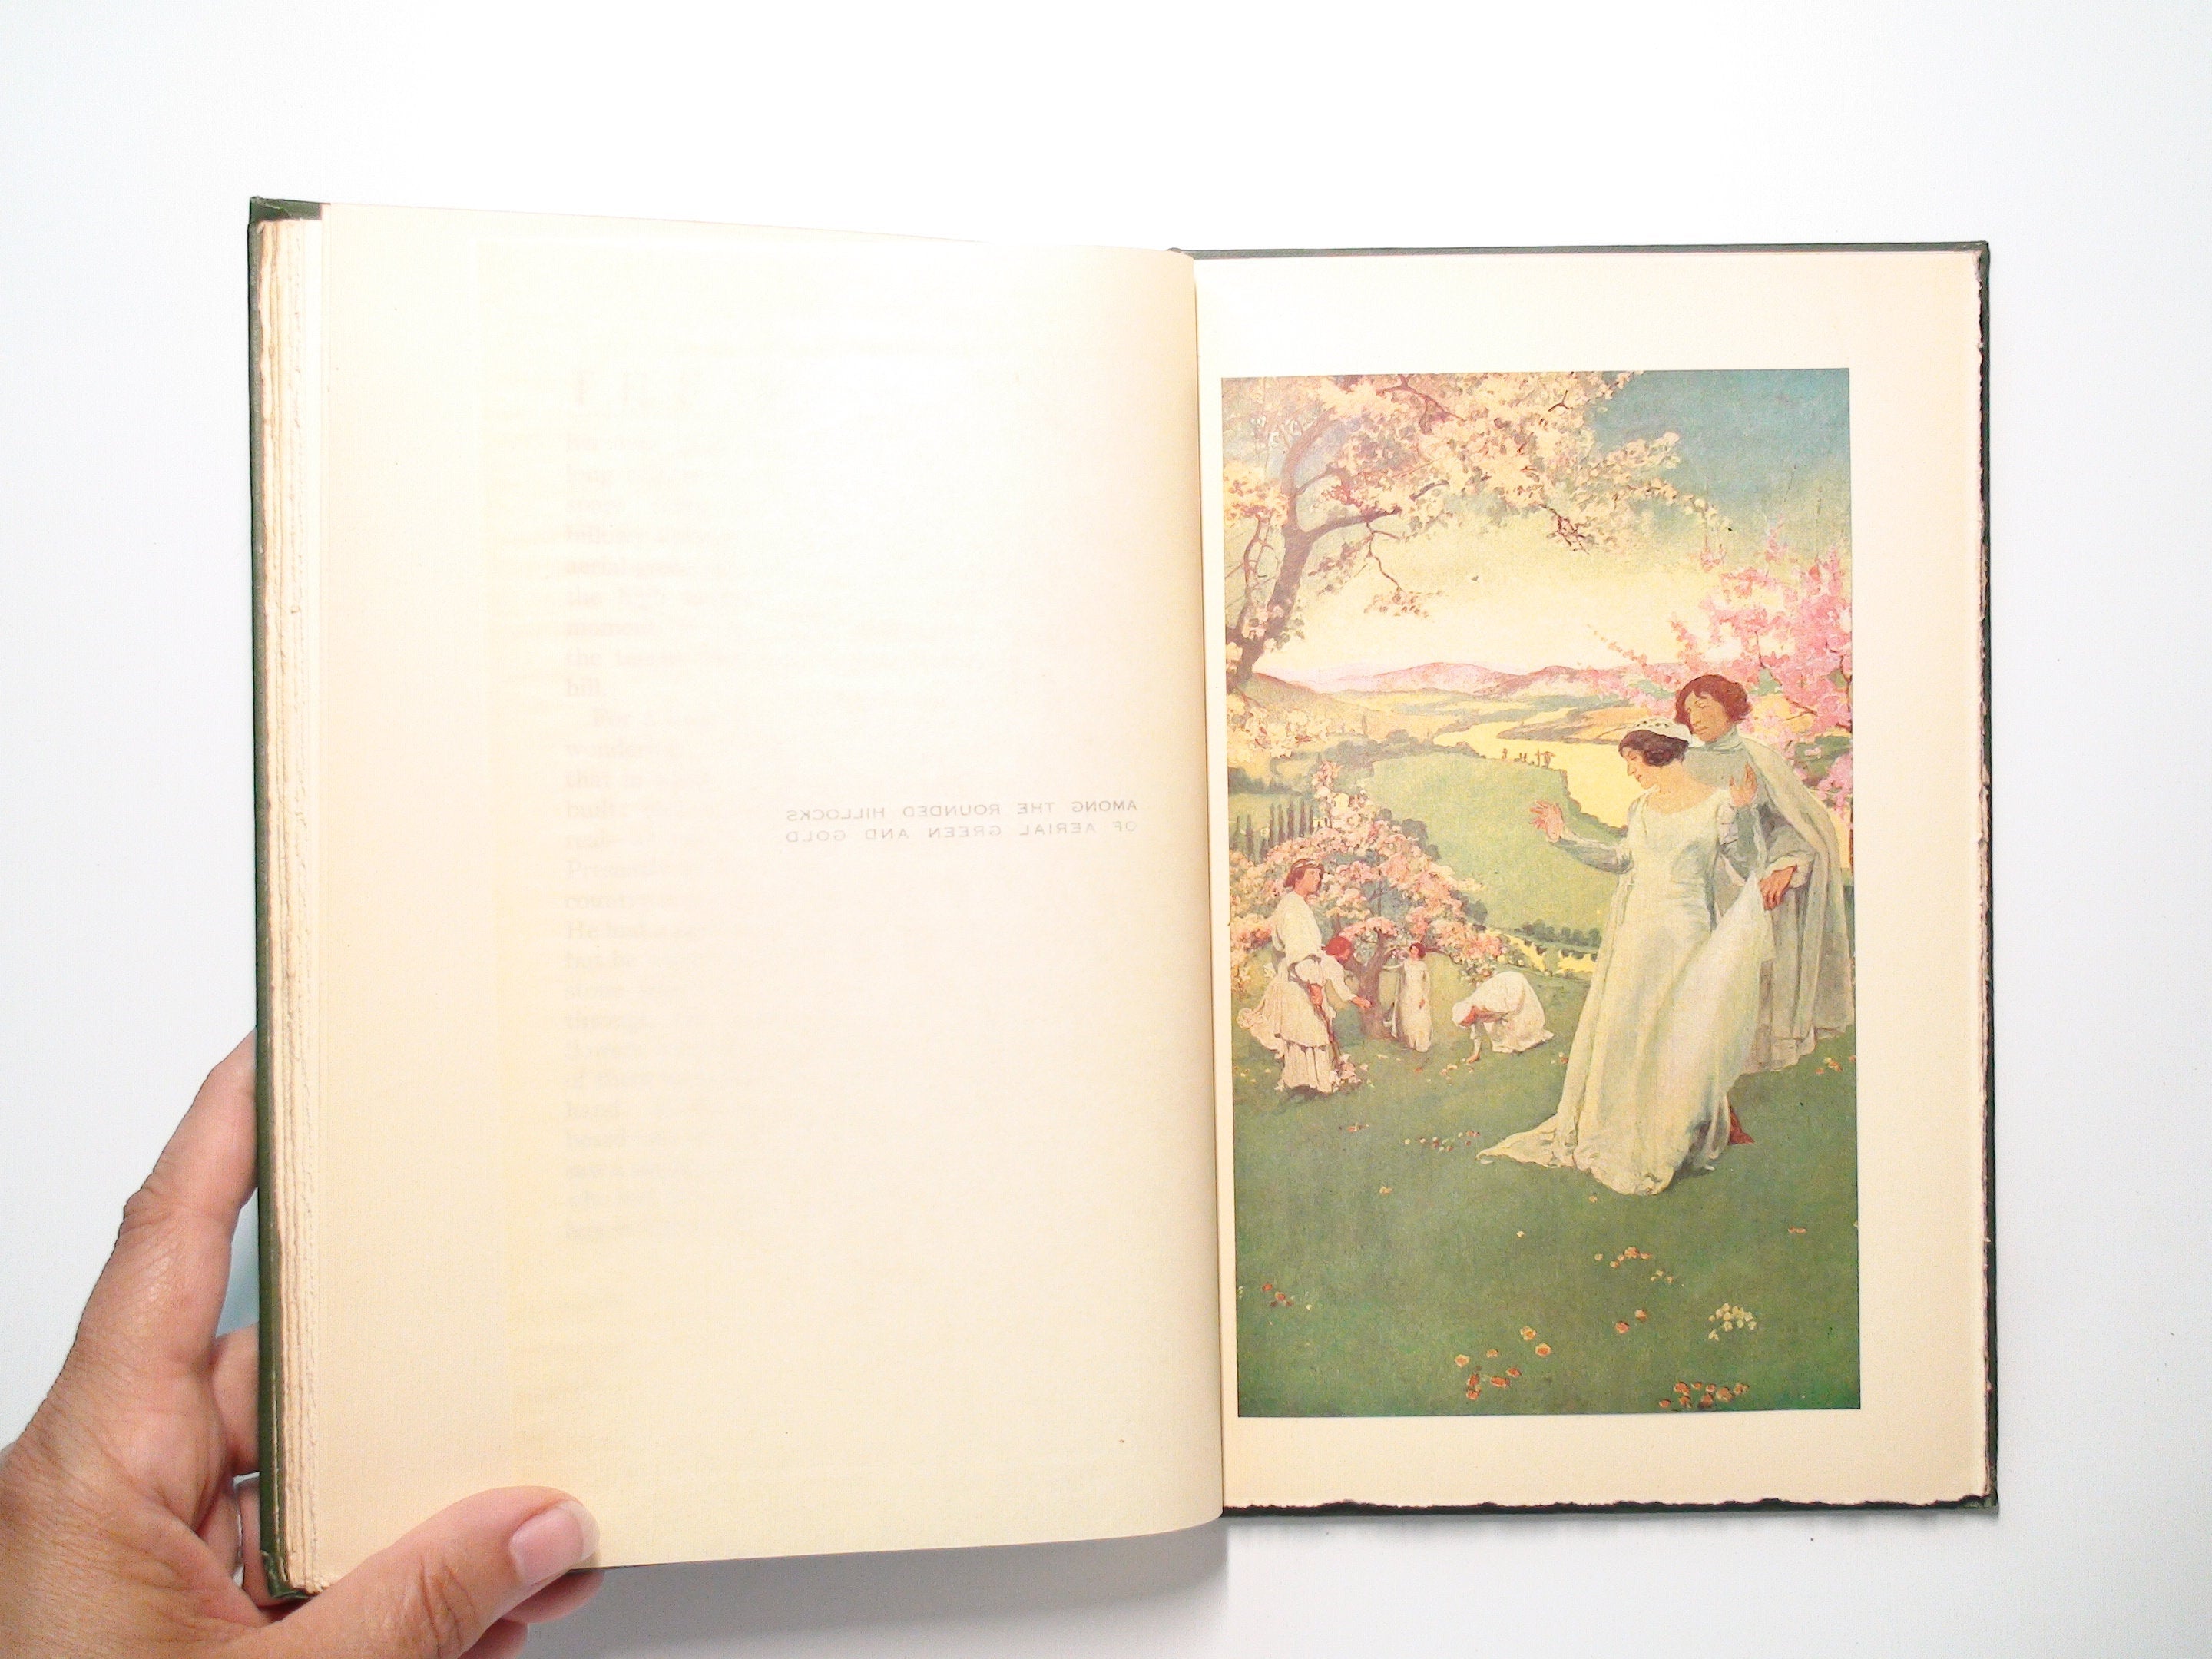 The Mansion by Henry Van Dyke, Illustrated by Elizabeth Shippen, 1st Ed, 1911